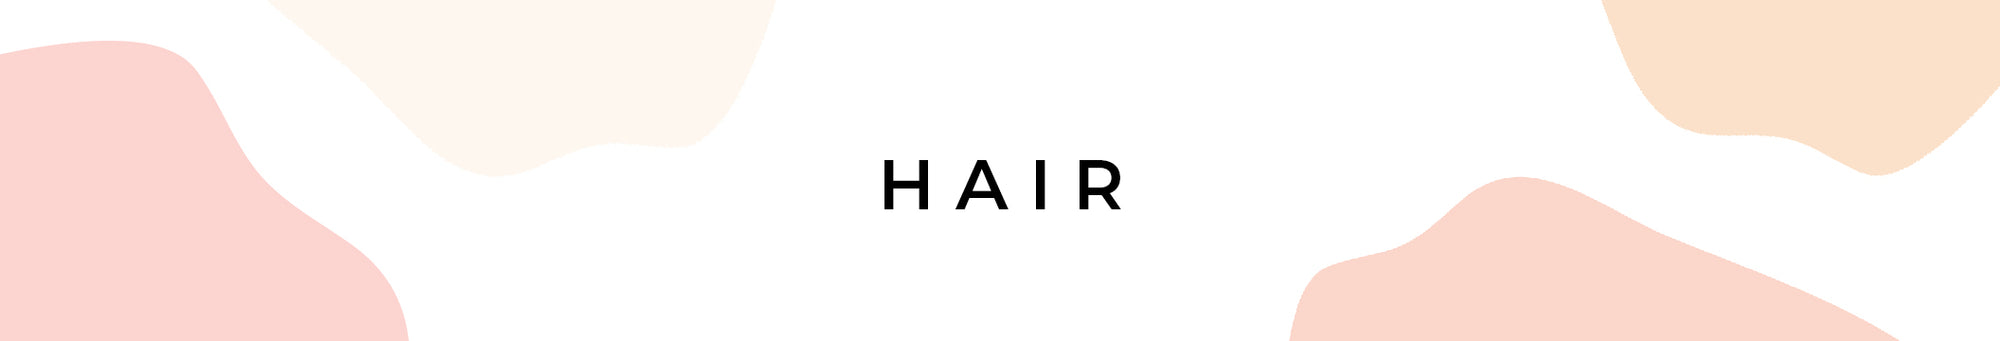 hair-product-page